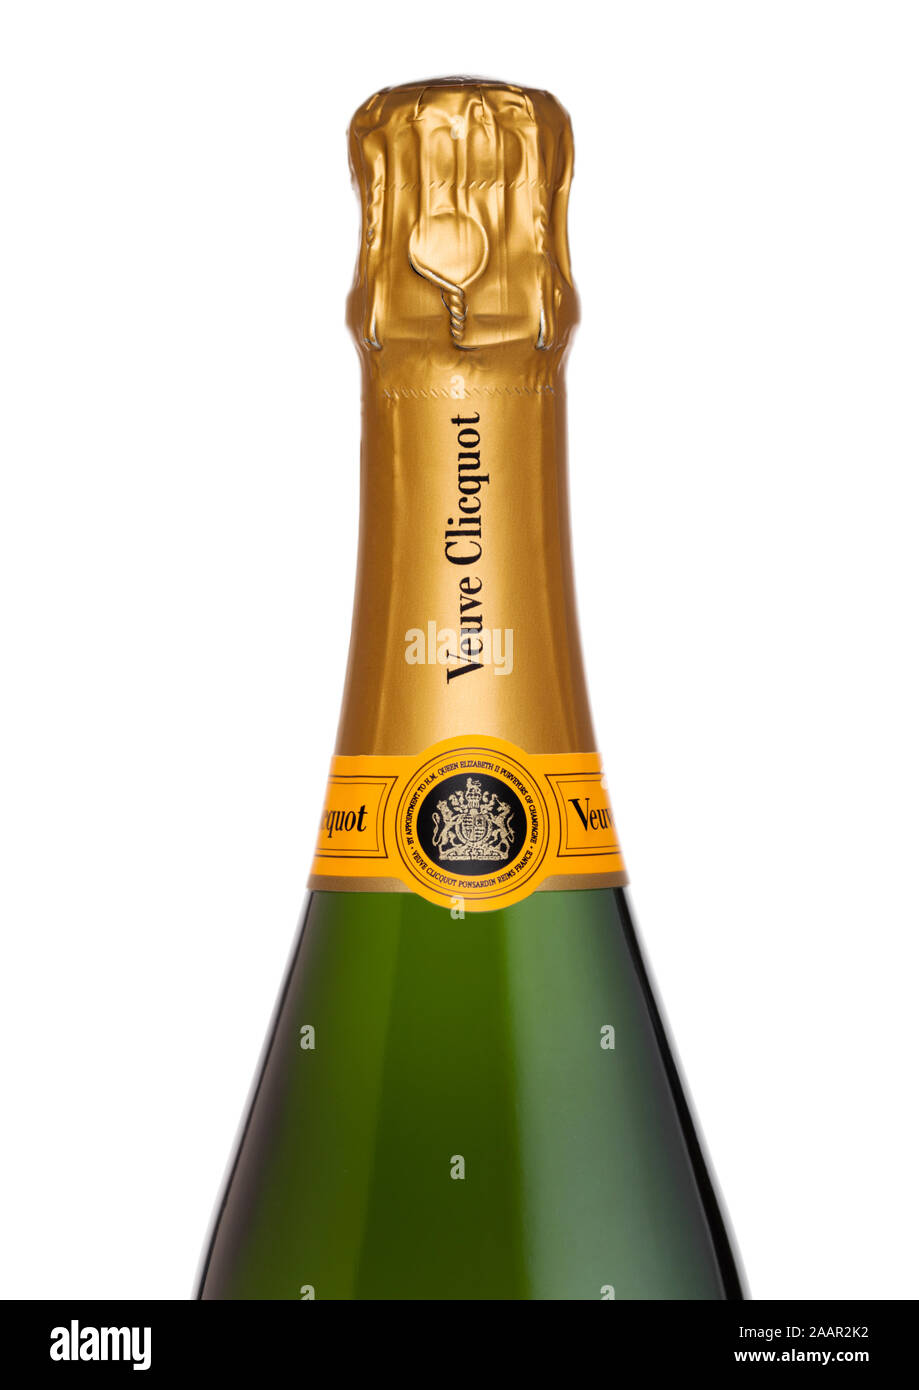 Veuve clicquot champagne bottle hi-res stock photography and images - Alamy